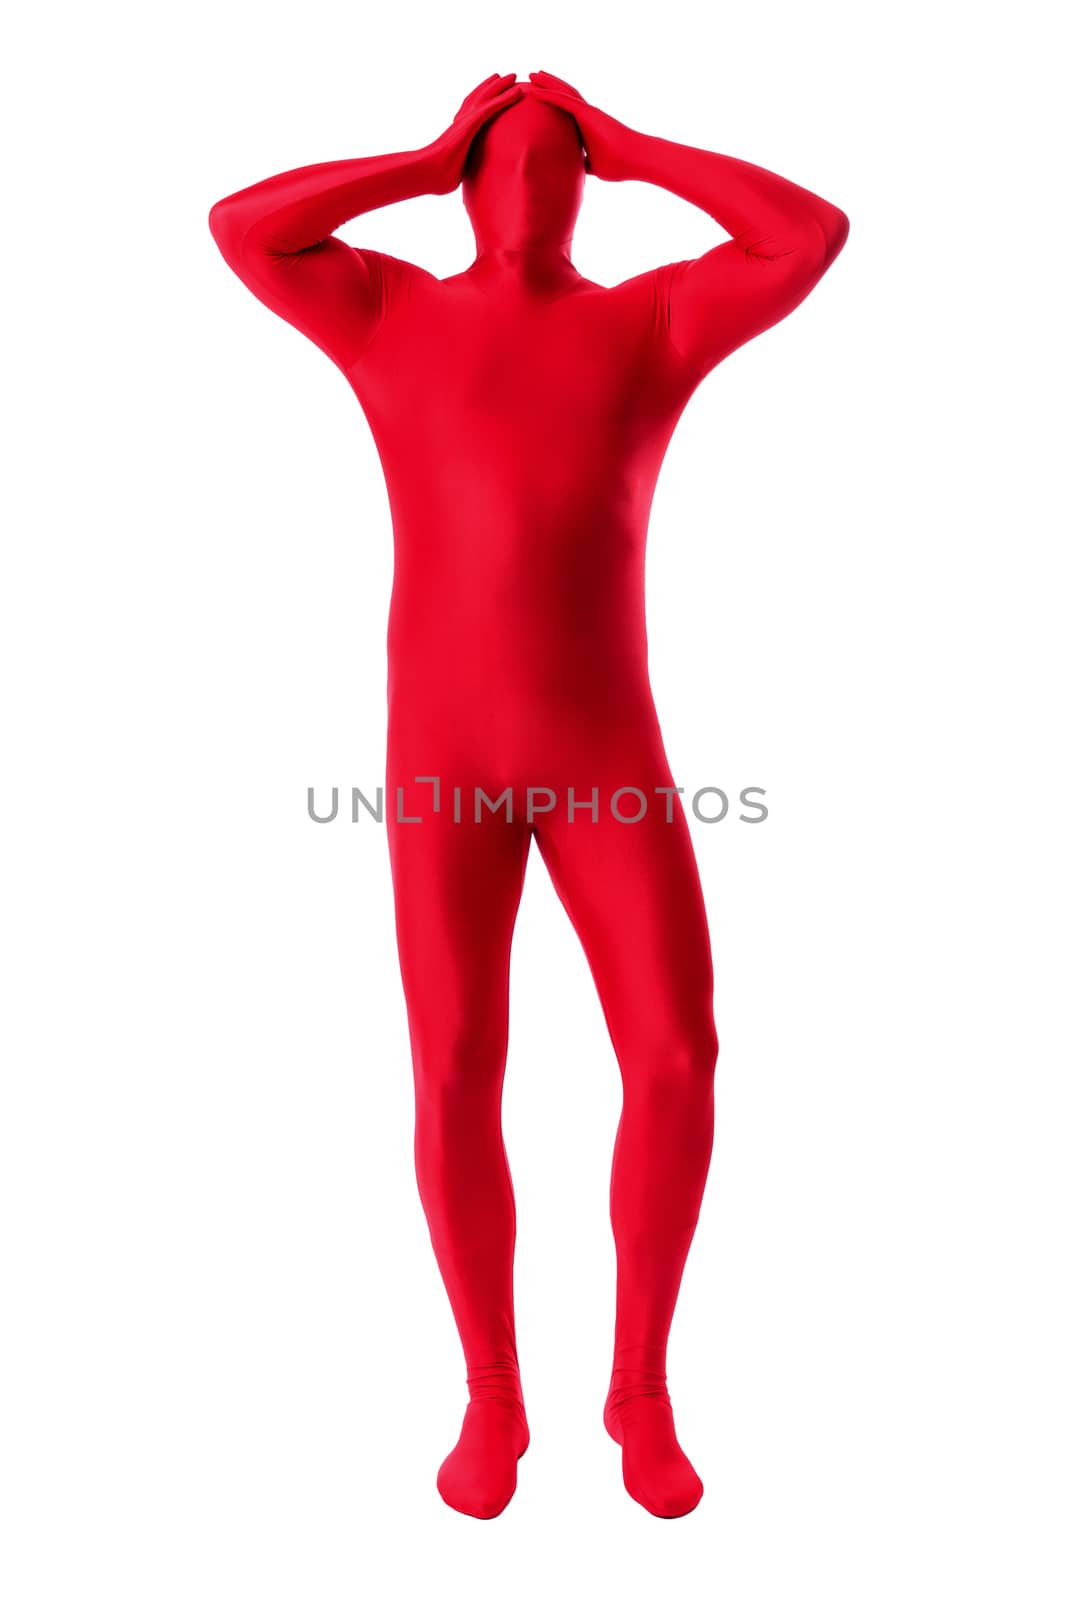 man in a red body suit by magann